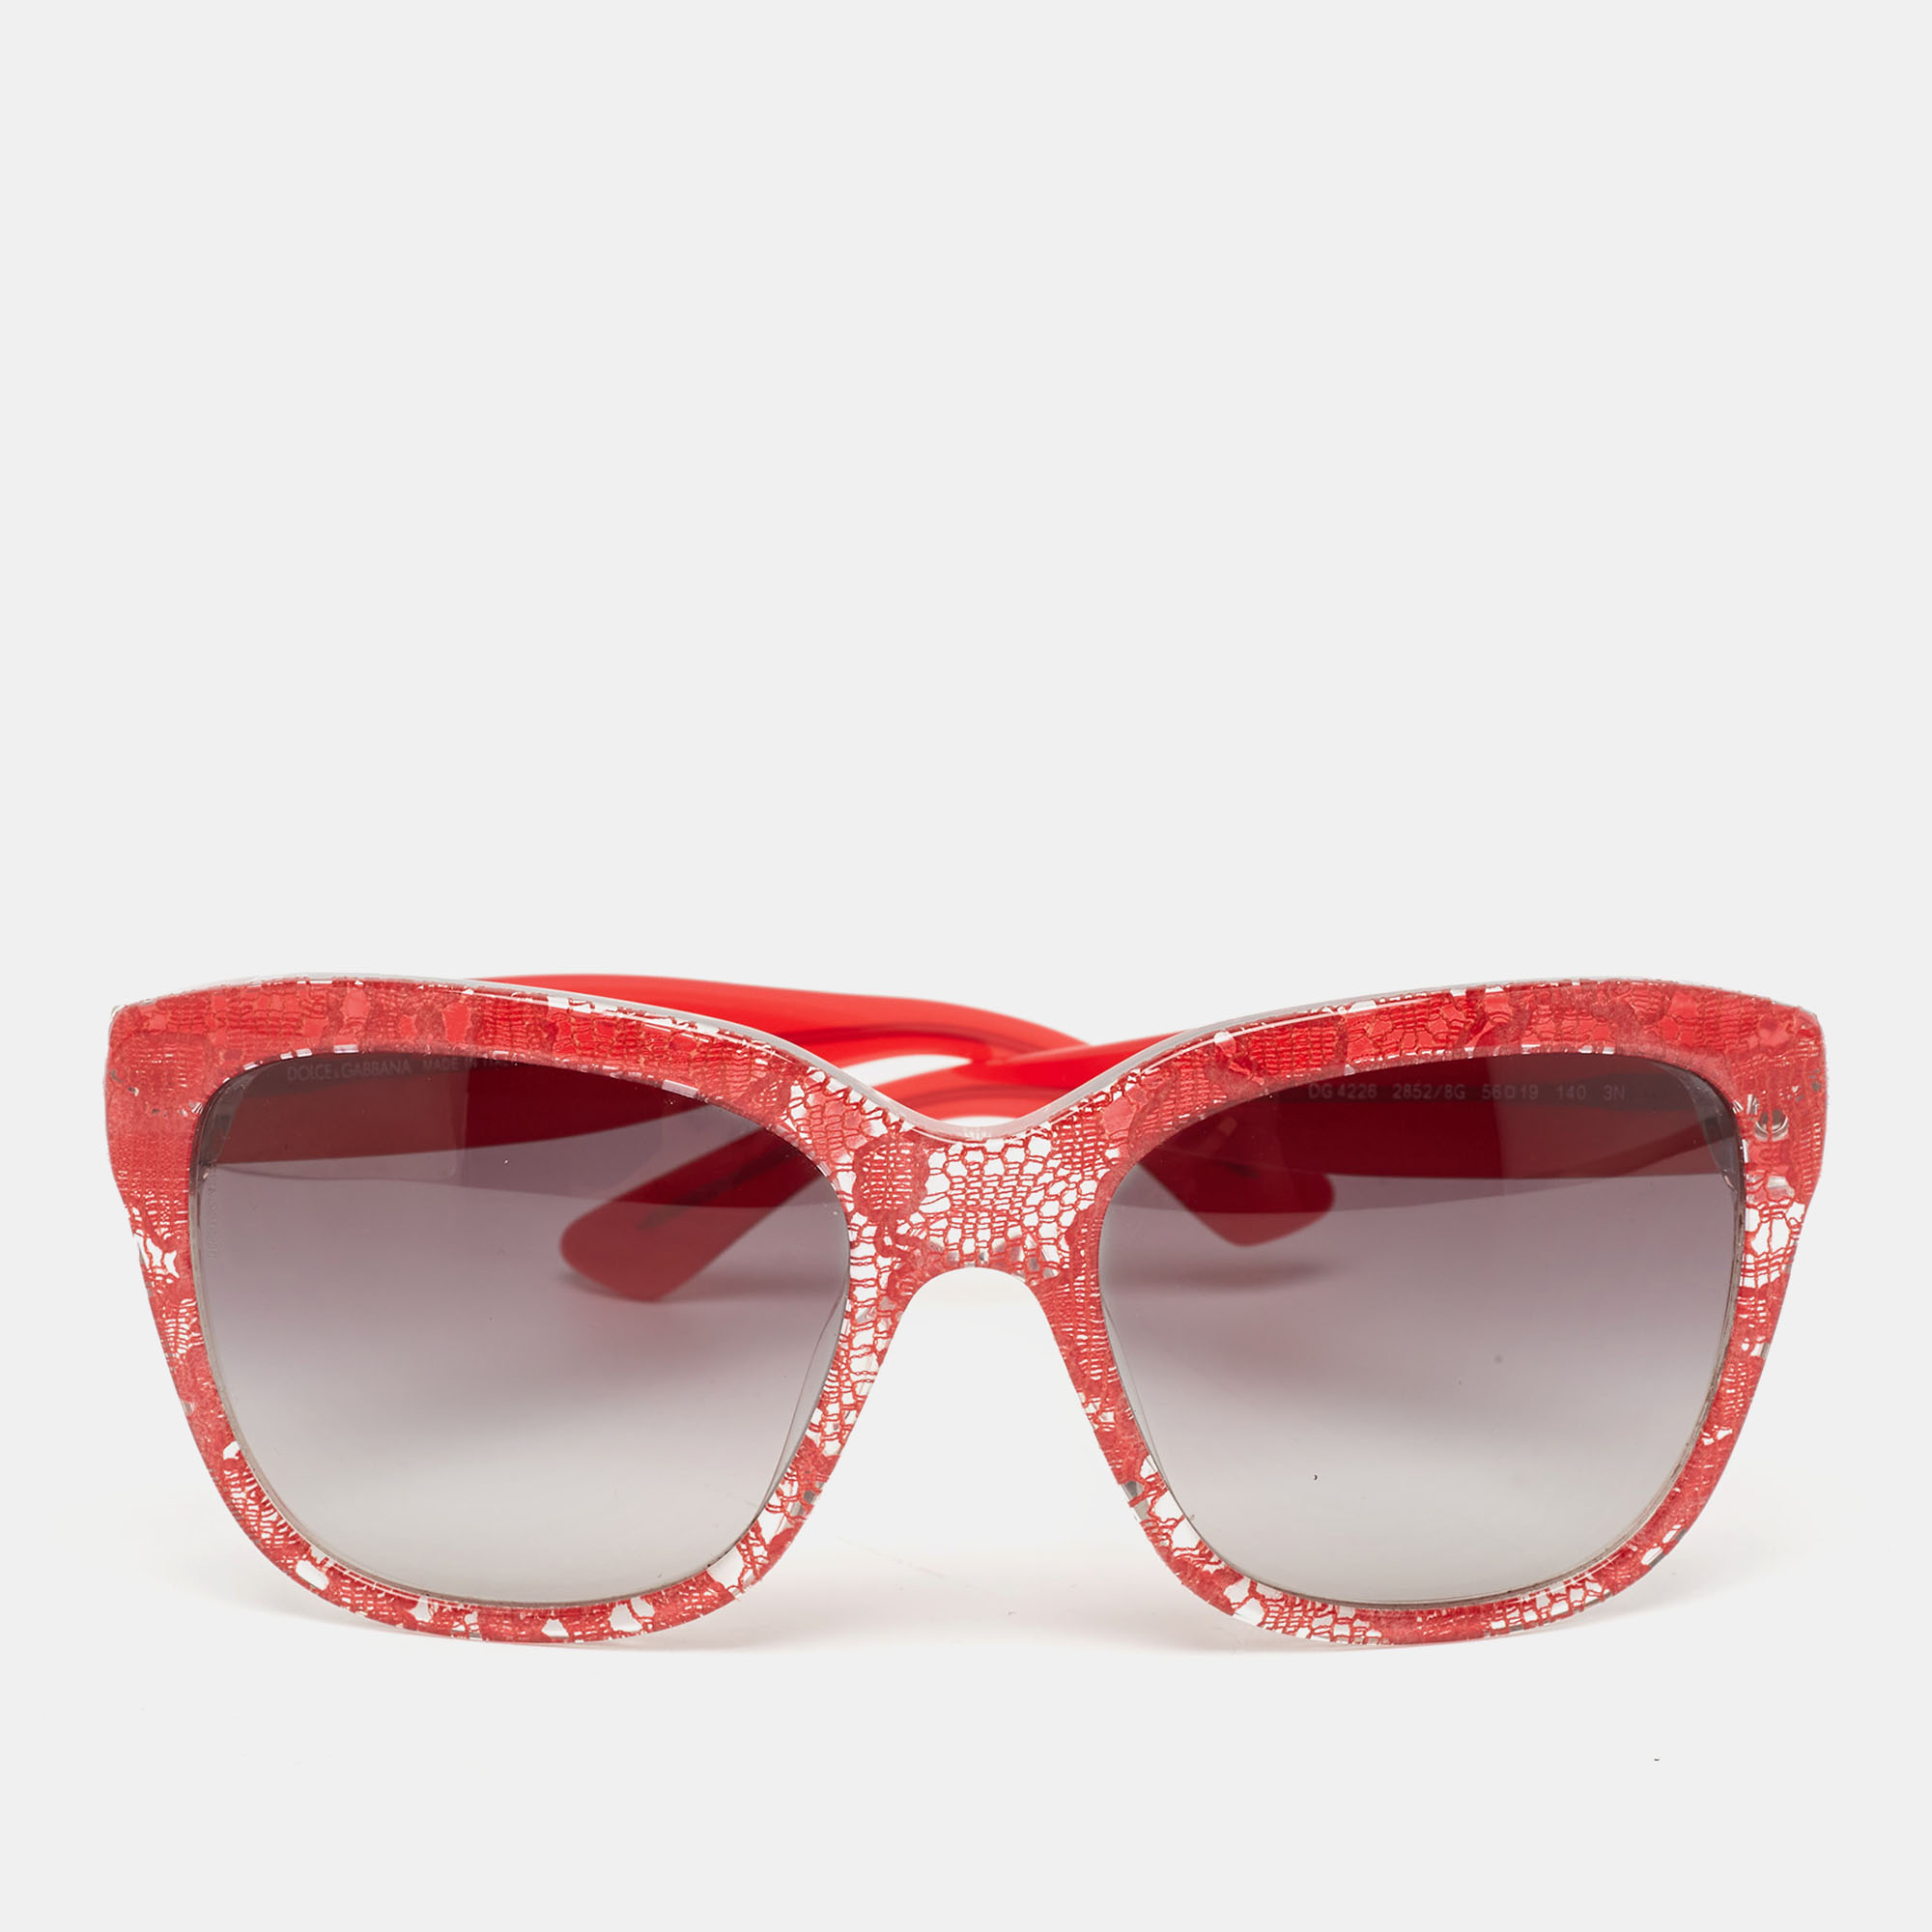 Pre-owned Dolce & Gabbana Red Lace Print Dg4226 Square Sunglasses